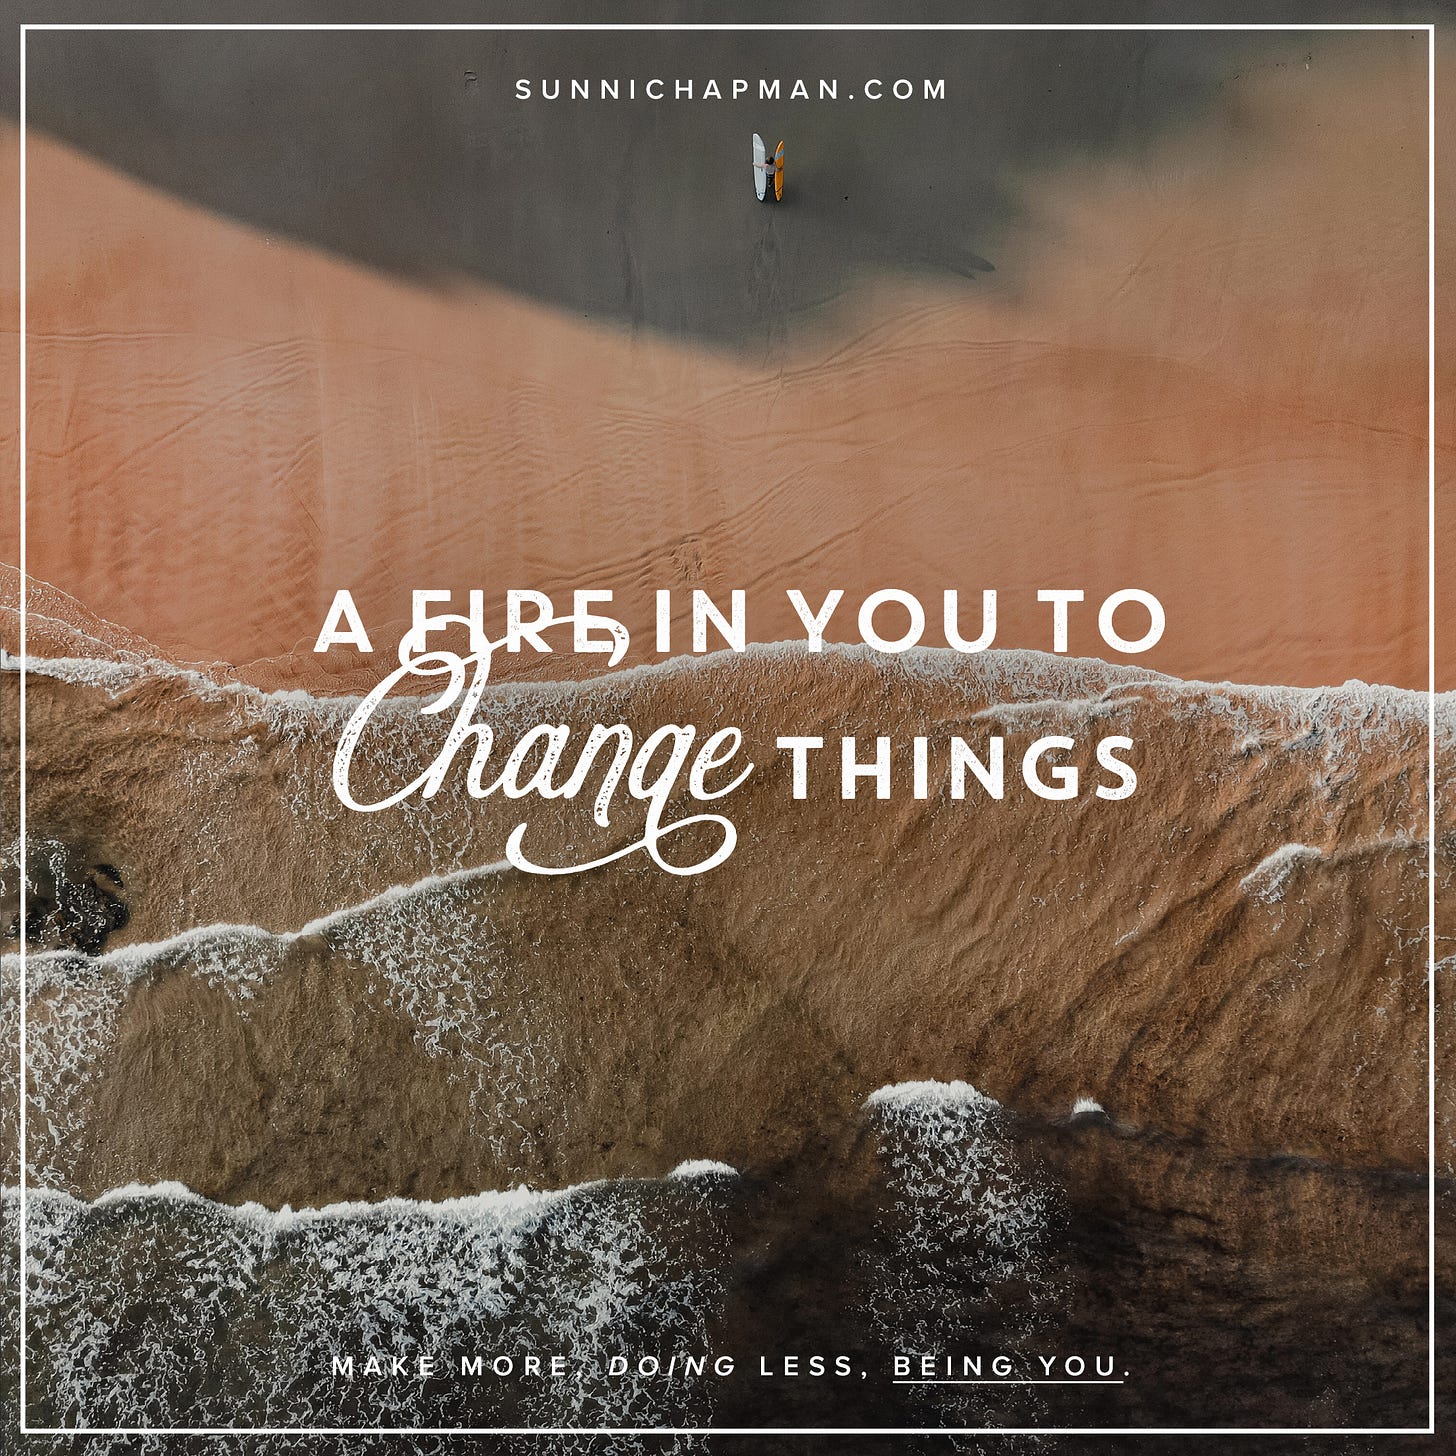 The image is a square format with a motivational quote that reads: "A FIRE IN YOU TO CHANGE THINGS". The quote is in a decorative script font, predominantly white with a shadow effect, making it stand out against the background. Below the quote, there's a smaller text that says "MAKE MORE DOING LESS, BEING YOU." in a plain, sans-serif font. The background of the image appears to be an aerial shot of a beach where waves are gently crashing onto the sand, creating foam. The upper part of the image has a darker, perhaps shaded area, transitioning to a lighter brown, resembling the sand below. In the upper center, there is a small logo, and above it, the text "SUNNICHAPMAN.COM" is written in small, capital letters. The overall theme of the image is inspirational, urging the viewer to harness their inner passion to create change, with an emphasis on efficiency and authenticity.